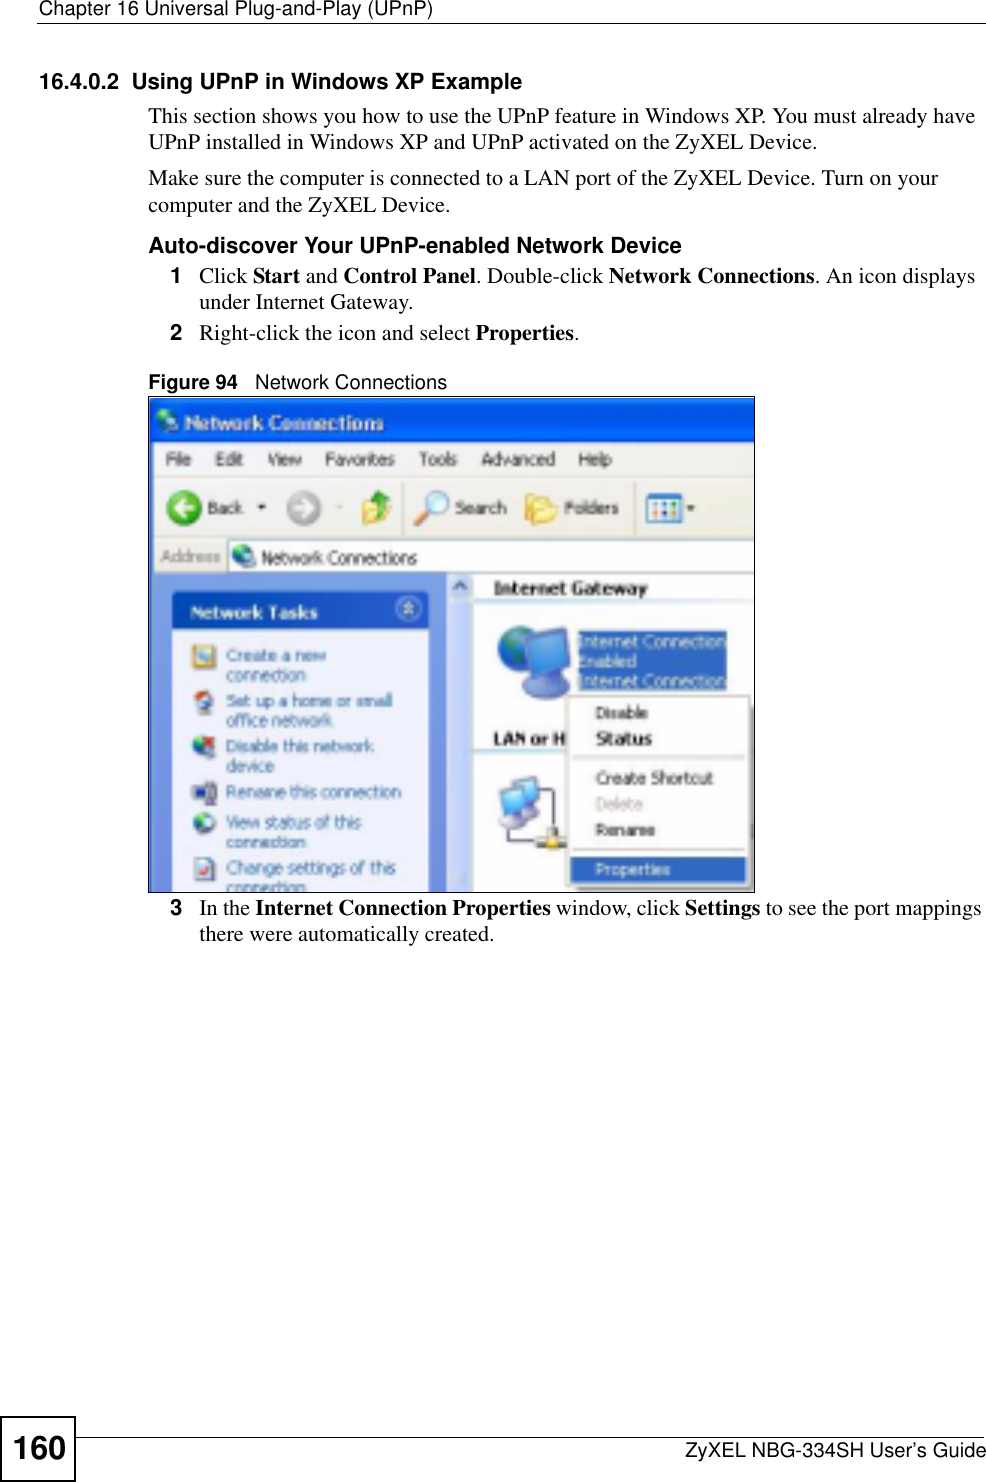 Chapter 16 Universal Plug-and-Play (UPnP)ZyXEL NBG-334SH User’s Guide16016.4.0.2  Using UPnP in Windows XP ExampleThis section shows you how to use the UPnP feature in Windows XP. You must already have UPnP installed in Windows XP and UPnP activated on the ZyXEL Device.Make sure the computer is connected to a LAN port of the ZyXEL Device. Turn on your computer and the ZyXEL Device. Auto-discover Your UPnP-enabled Network Device1Click Start and Control Panel. Double-click Network Connections. An icon displays under Internet Gateway.2Right-click the icon and select Properties.Figure 94   Network Connections3In the Internet Connection Properties window, click Settings to see the port mappings there were automatically created. 